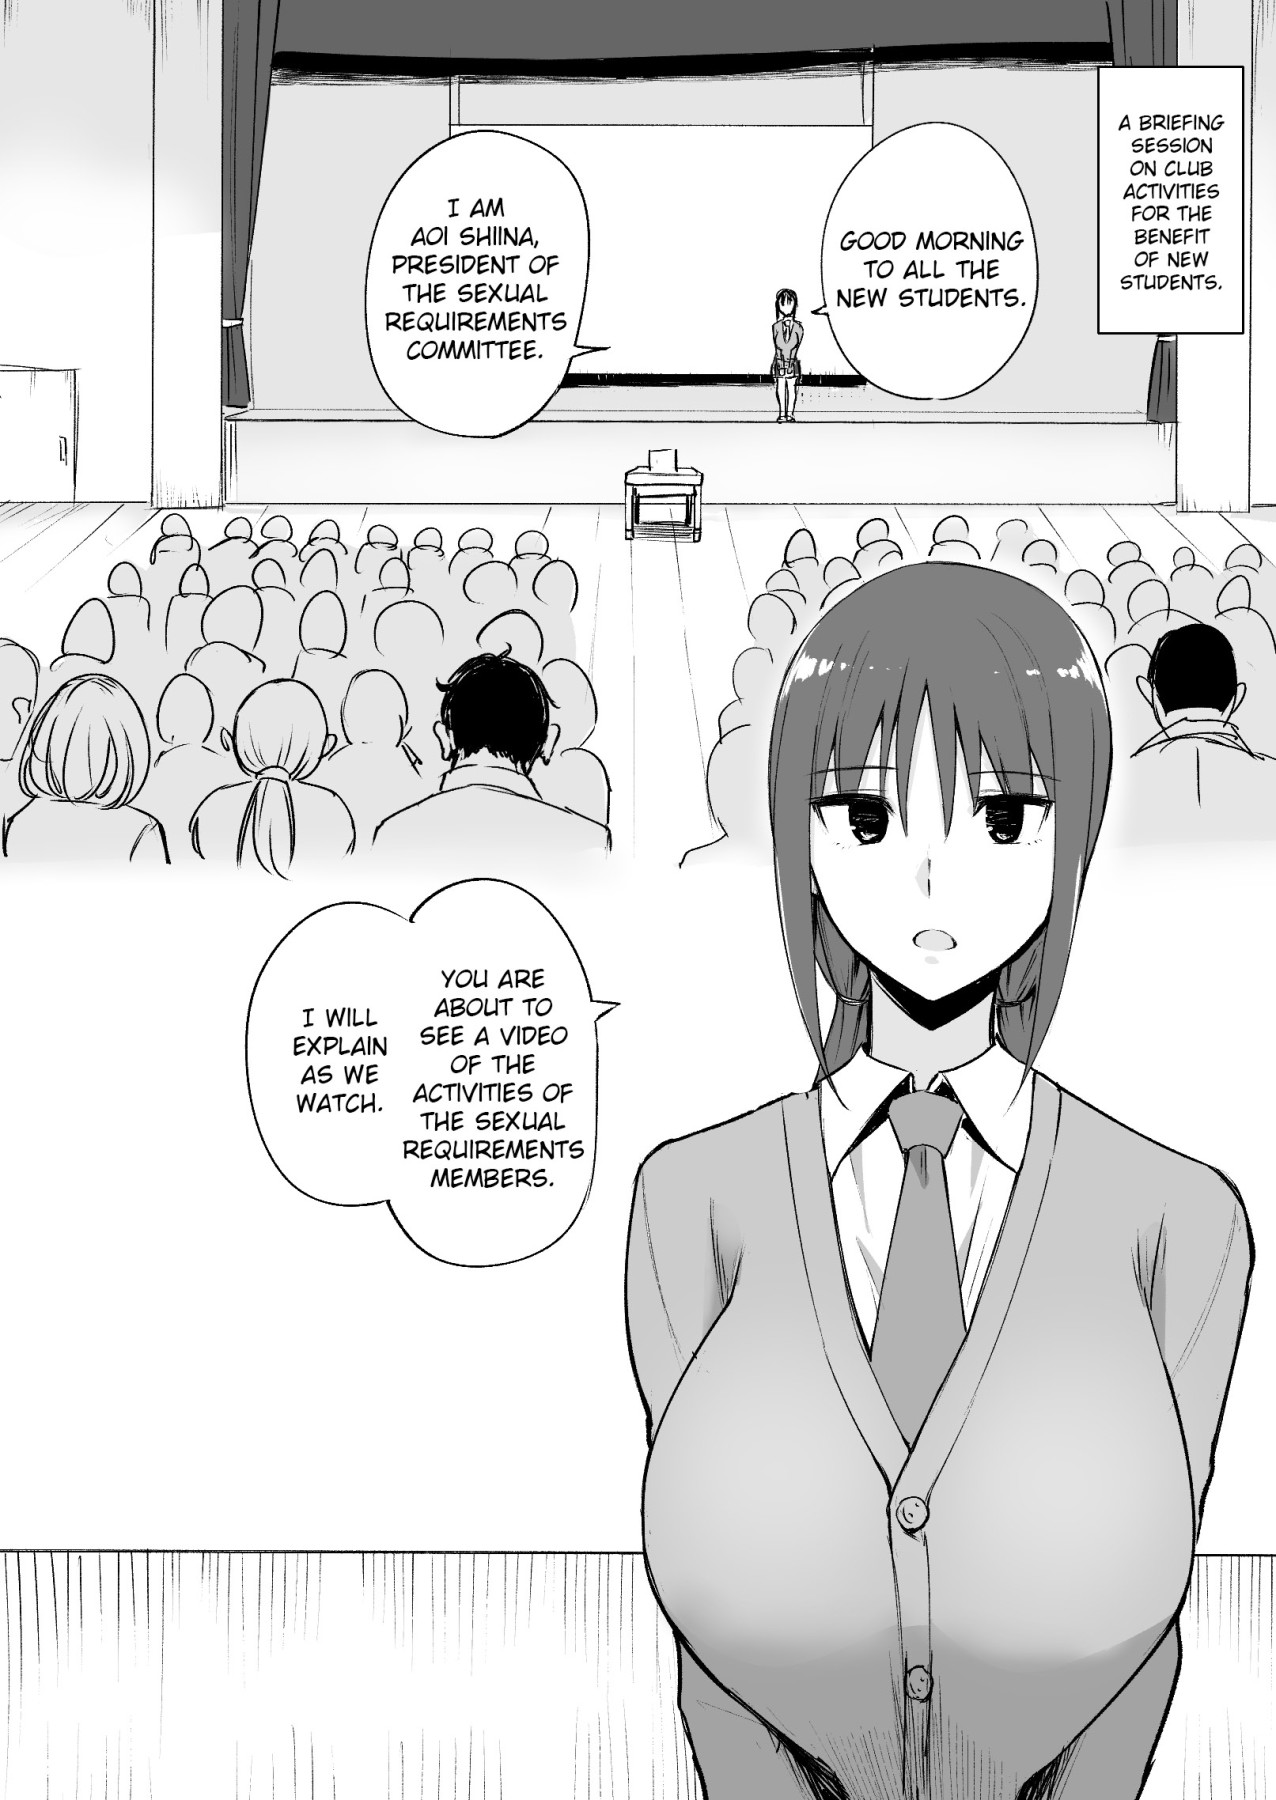 Hentai Manga Comic-An Explanation of the Duties of a Sexual Requirements Committee Member-Read-2